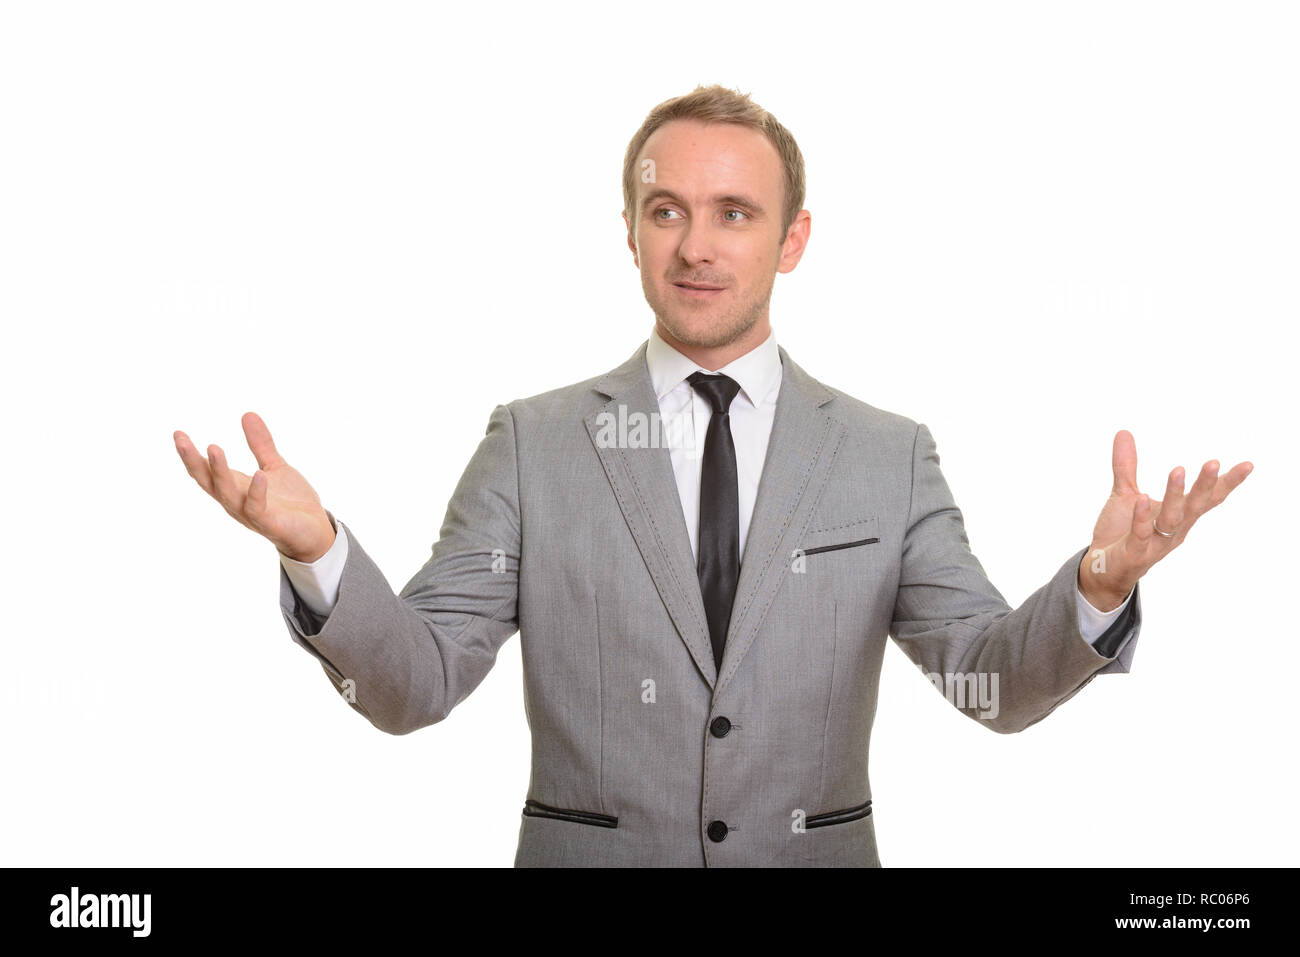 Handsome Caucasian businessman giving speech isolated against white background Stock Photo